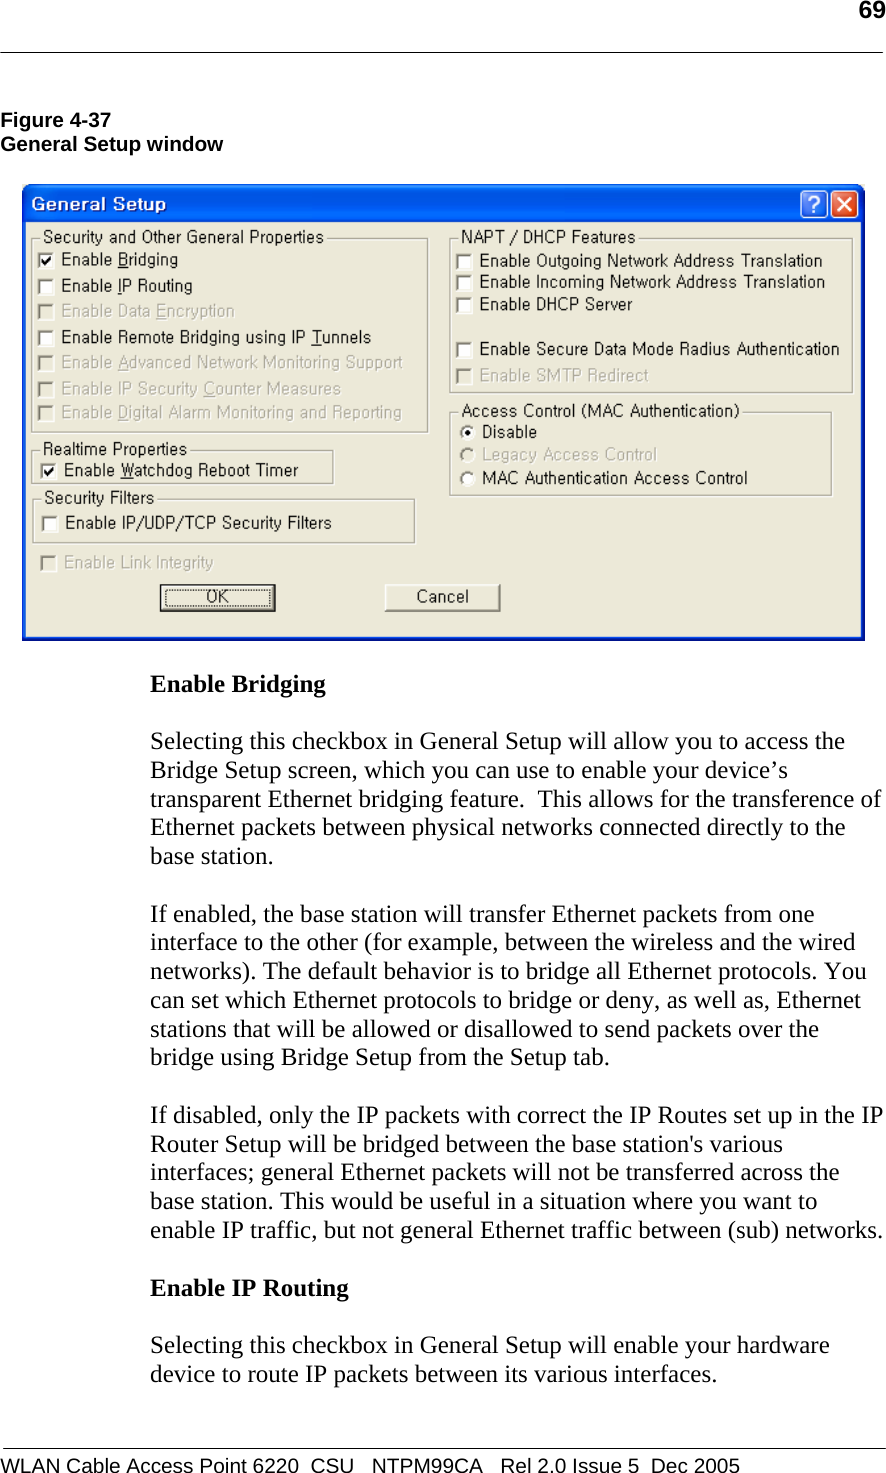   69  WLAN Cable Access Point 6220  CSU   NTPM99CA   Rel 2.0 Issue 5  Dec 2005 Figure 4-37 General Setup window    Enable Bridging  Selecting this checkbox in General Setup will allow you to access the Bridge Setup screen, which you can use to enable your device’s transparent Ethernet bridging feature.  This allows for the transference of Ethernet packets between physical networks connected directly to the base station.   If enabled, the base station will transfer Ethernet packets from one interface to the other (for example, between the wireless and the wired networks). The default behavior is to bridge all Ethernet protocols. You can set which Ethernet protocols to bridge or deny, as well as, Ethernet stations that will be allowed or disallowed to send packets over the bridge using Bridge Setup from the Setup tab.  If disabled, only the IP packets with correct the IP Routes set up in the IP Router Setup will be bridged between the base station&apos;s various interfaces; general Ethernet packets will not be transferred across the base station. This would be useful in a situation where you want to enable IP traffic, but not general Ethernet traffic between (sub) networks.  Enable IP Routing  Selecting this checkbox in General Setup will enable your hardware device to route IP packets between its various interfaces.  